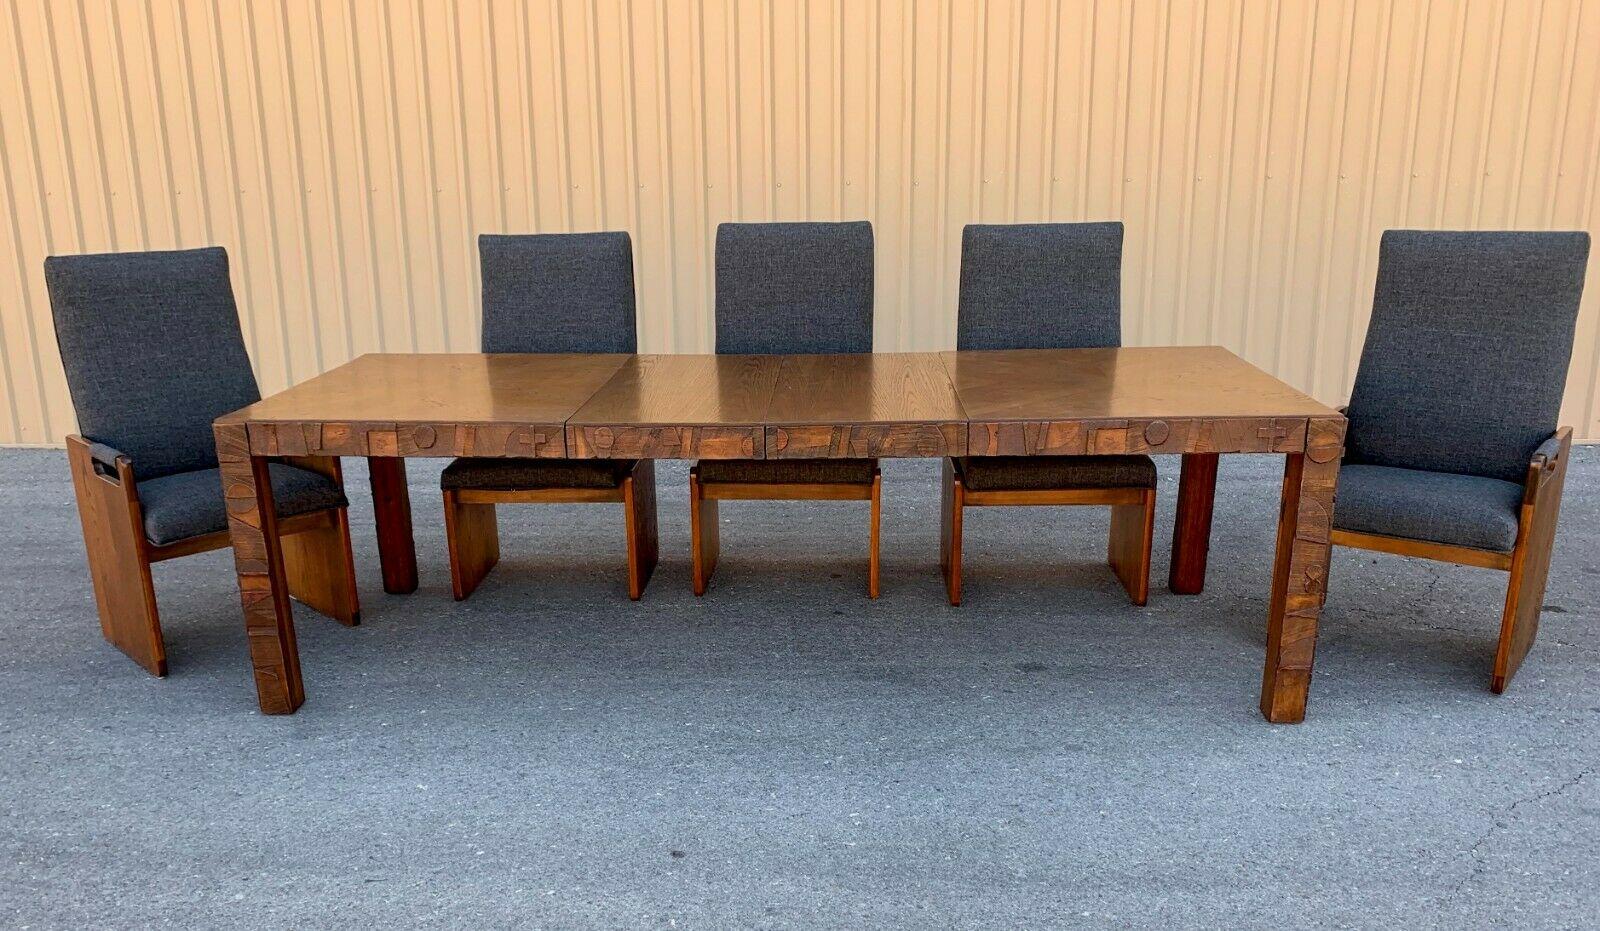 Oak MCM Lane Mid Century Brutalist Dining Table and 8 chairs style of Paul Evans